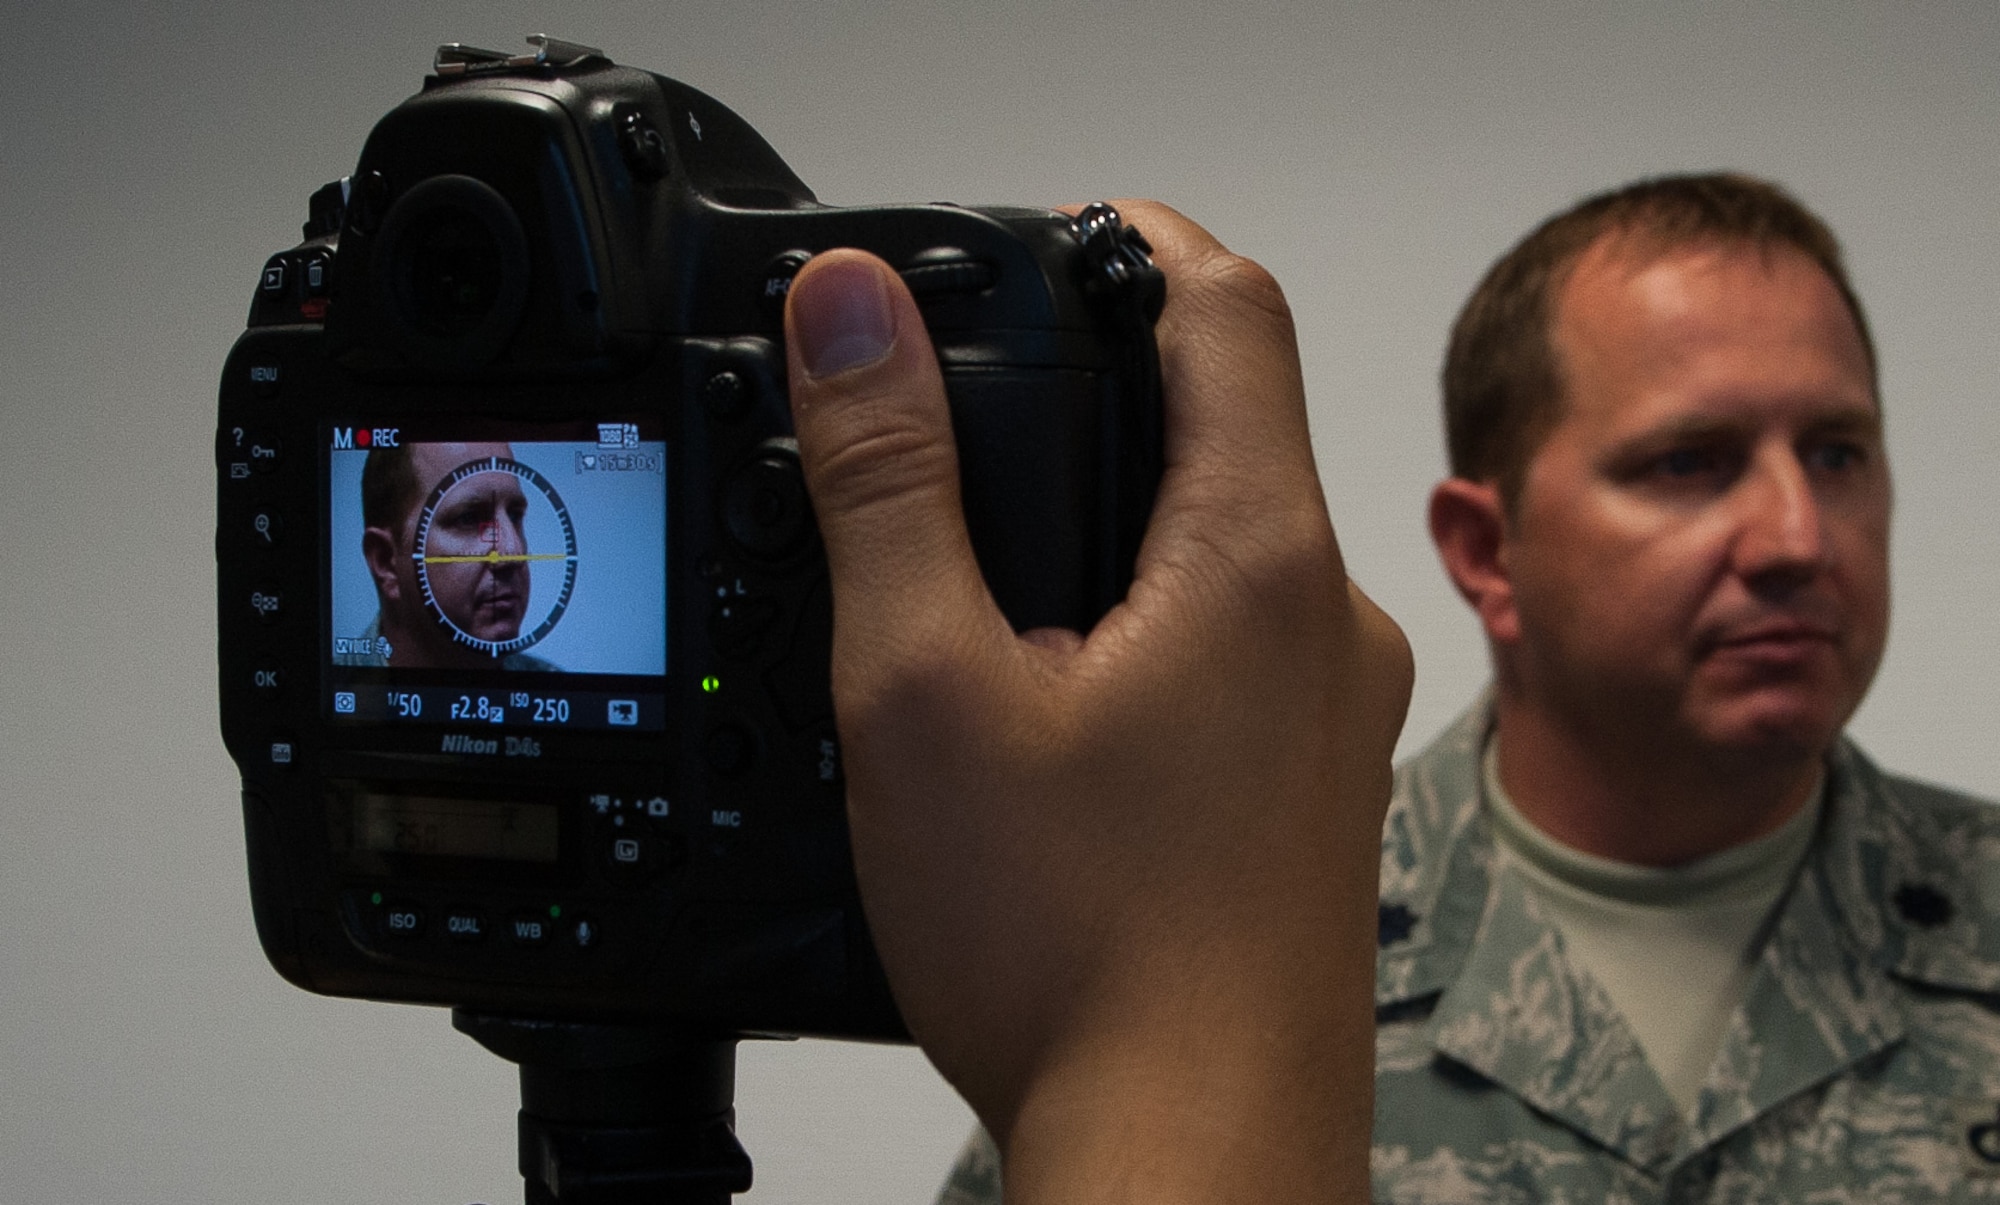 Lt. Col. Brady Vaira, 435th Contingency Response Group deputy commander, participates in a mock interview during a media training event Aug. 4, 2016, at Ramstein Air Base, Germany. The training prepared Airmen on how to properly handle and respond to questions during interviews with media personnel. (U.S. Air force photo/Airman 1st Class Lane T. Plummer)